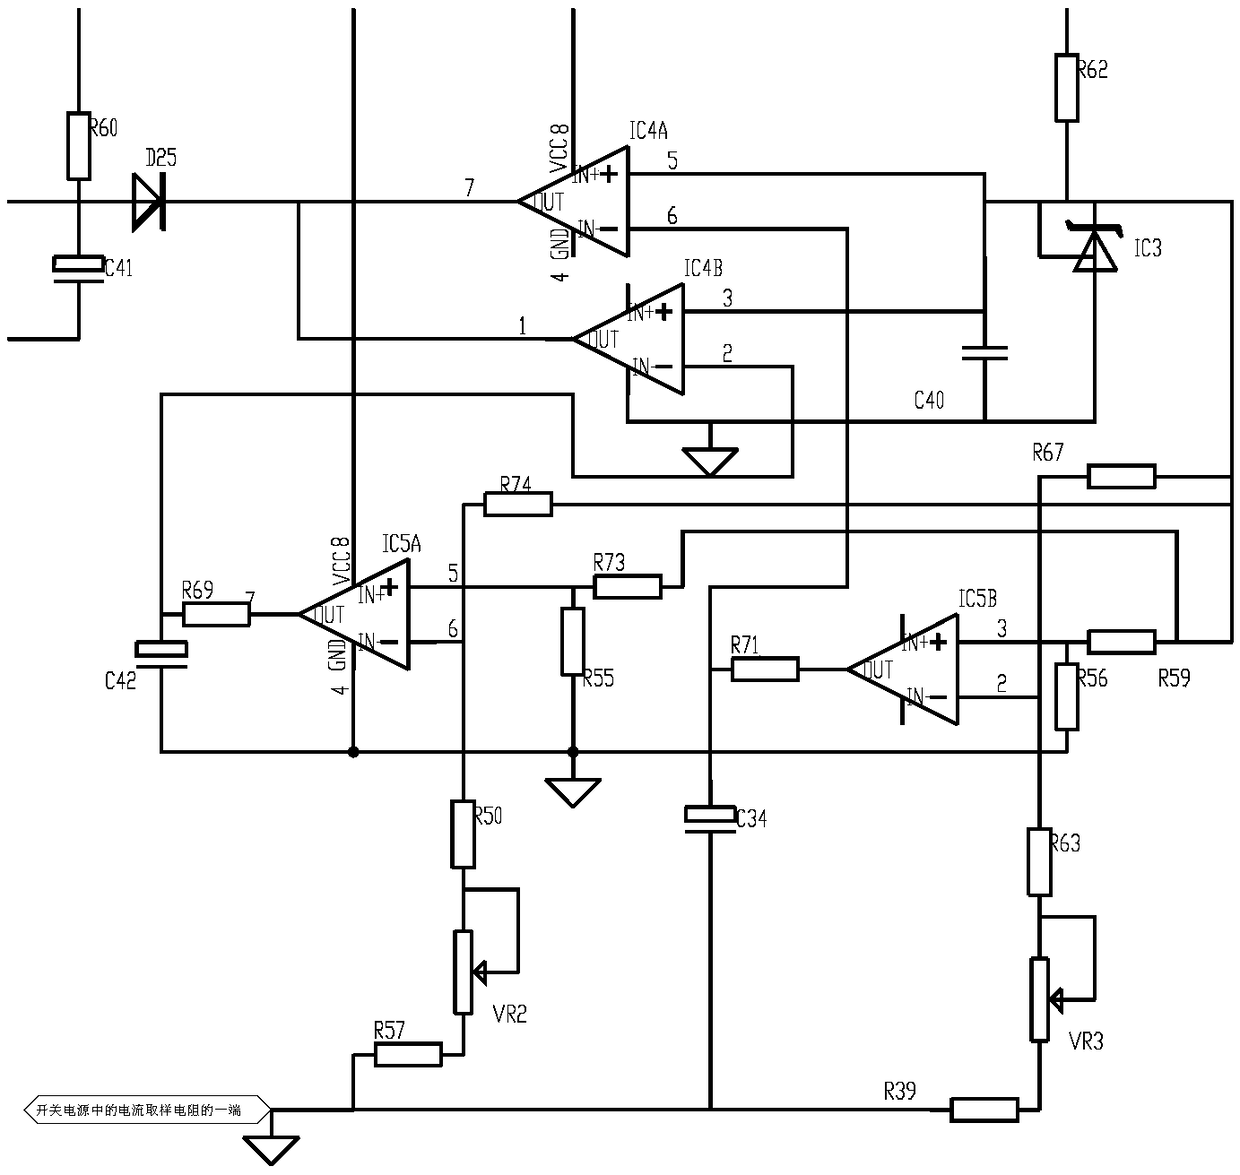 An overload hiccup protection circuit for a half-bridge topologyswitching power supply